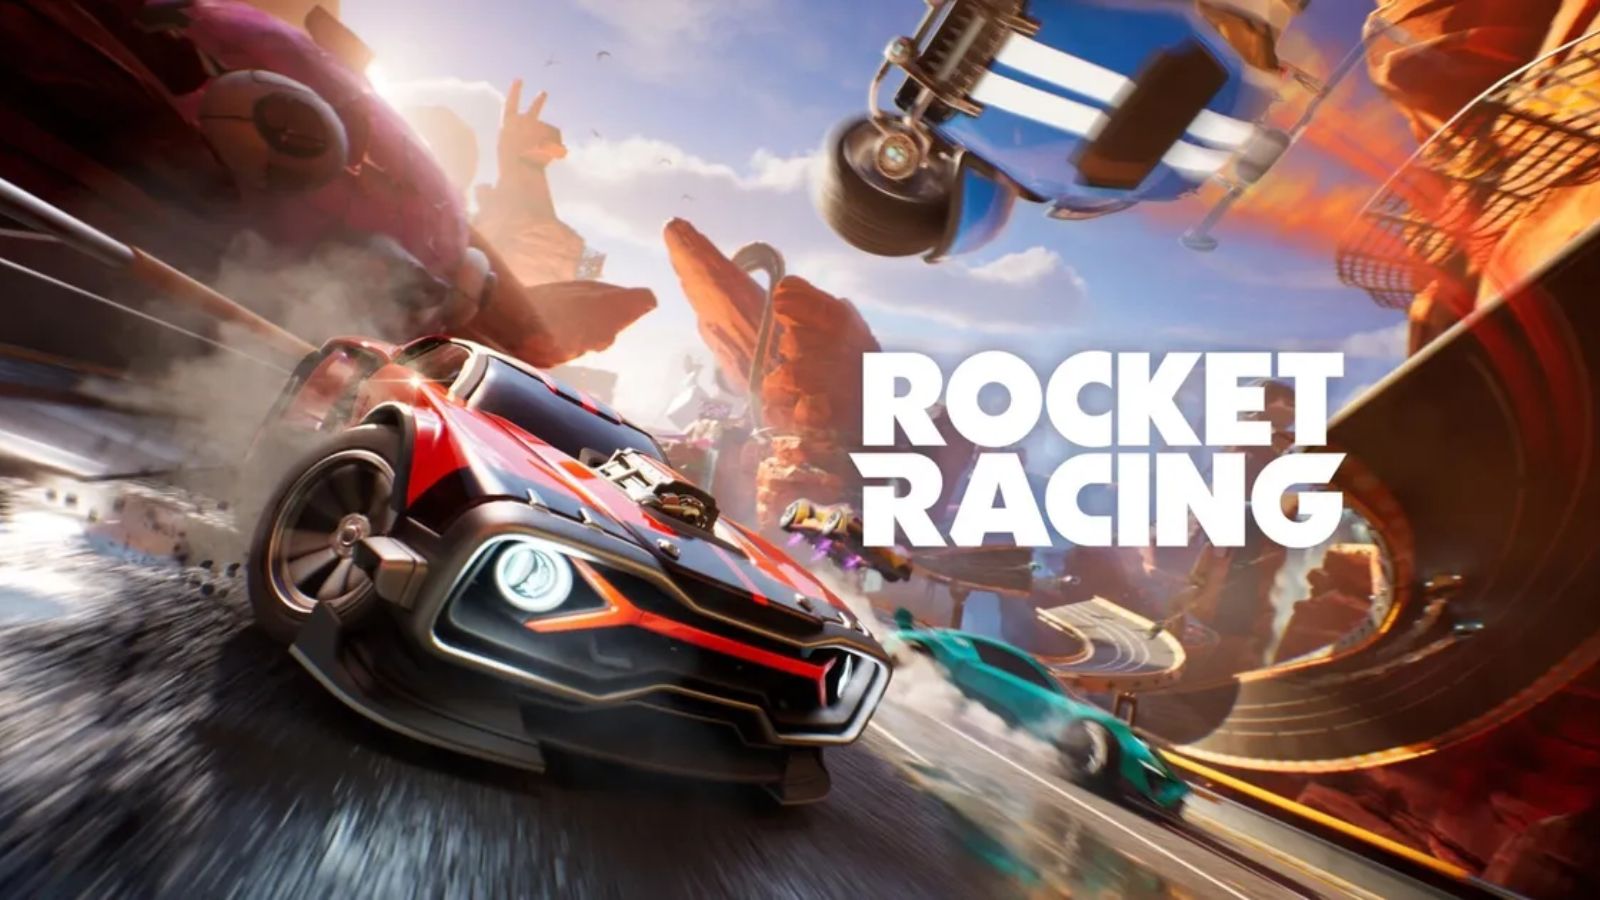 Rocket Racing  Download and Play for Free - Epic Games Store